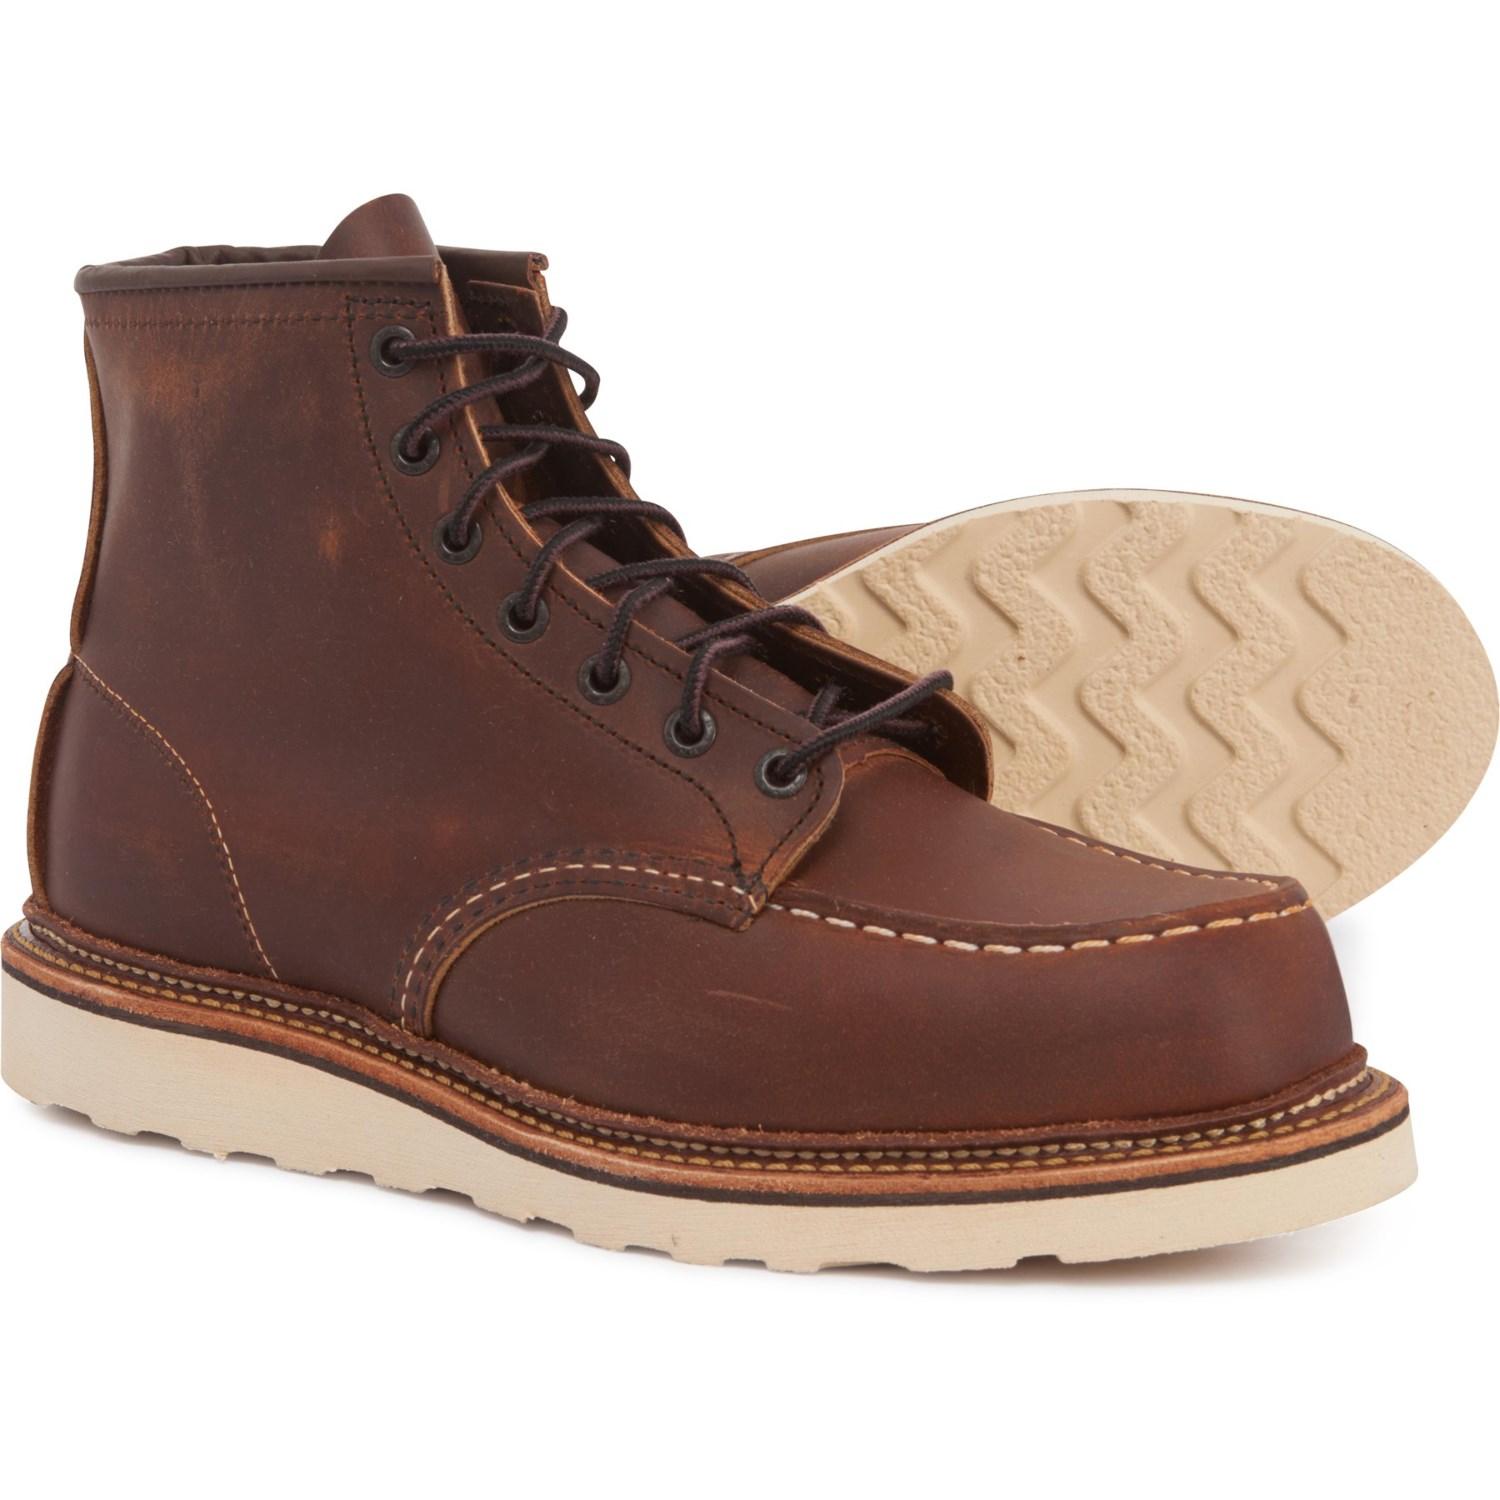 Red Wing Leather 1907 6? Moc-toe Boots in Copper (Brown) for Men - Lyst